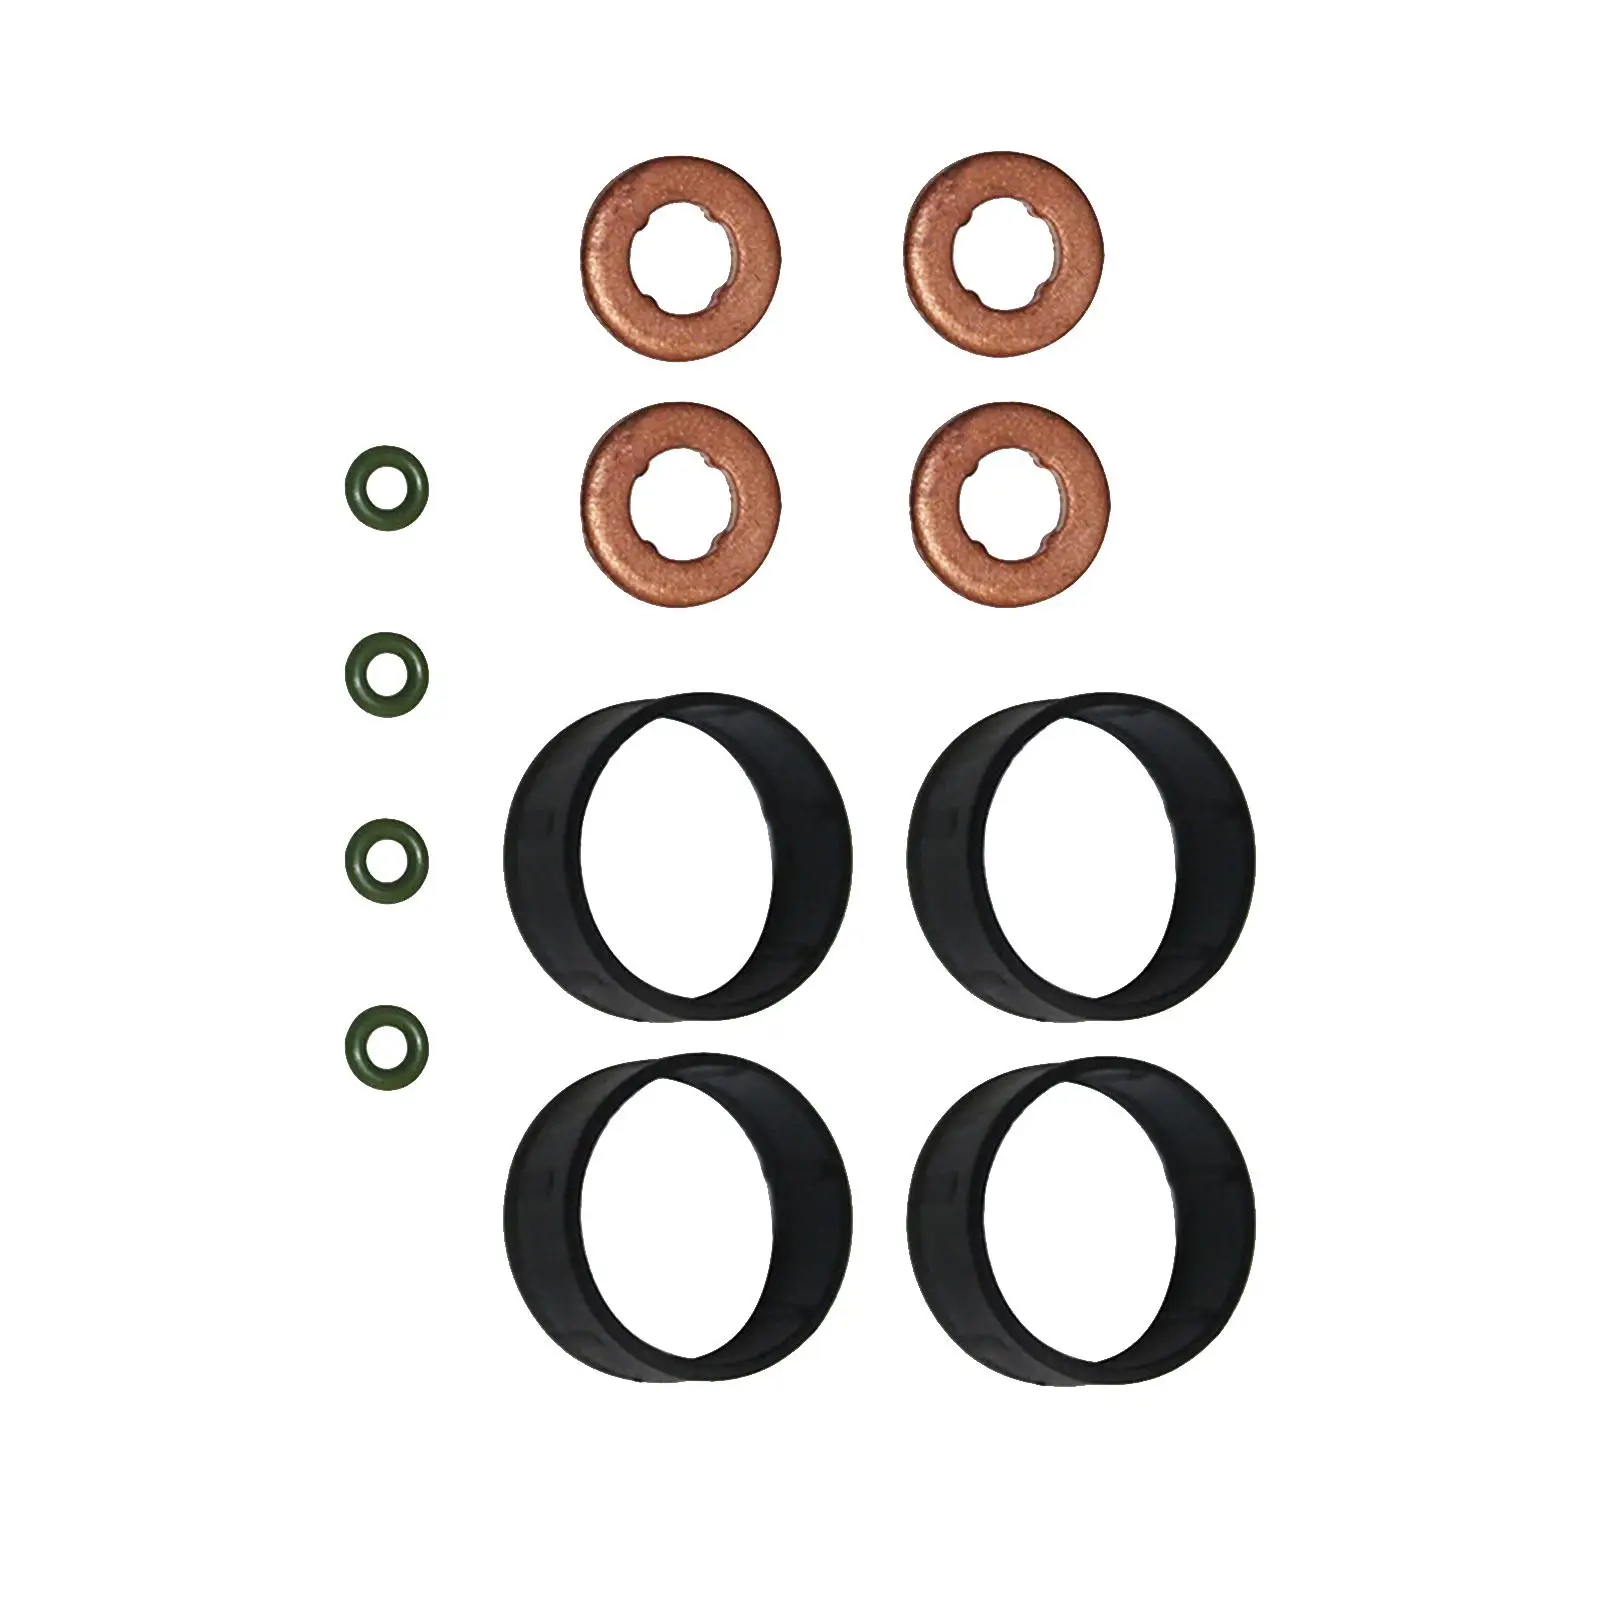 Fuel Injector Seal Washer O-ring Set 1204698 High Quality Replace Parts Durable